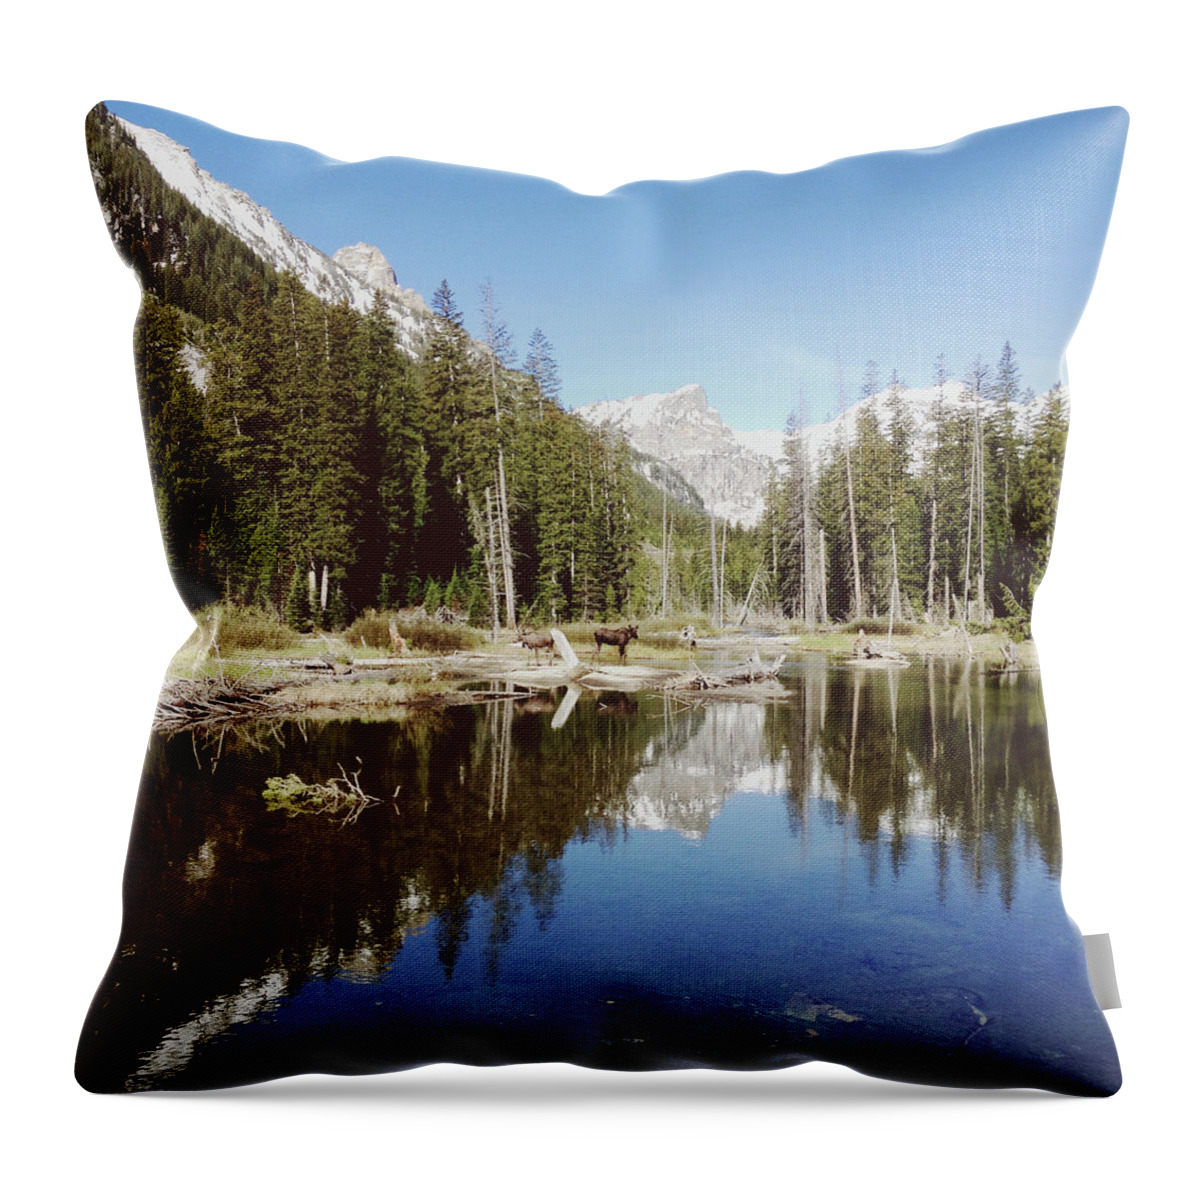 Scenics Throw Pillow featuring the photograph Two Moose And Trees by Kevin Russ